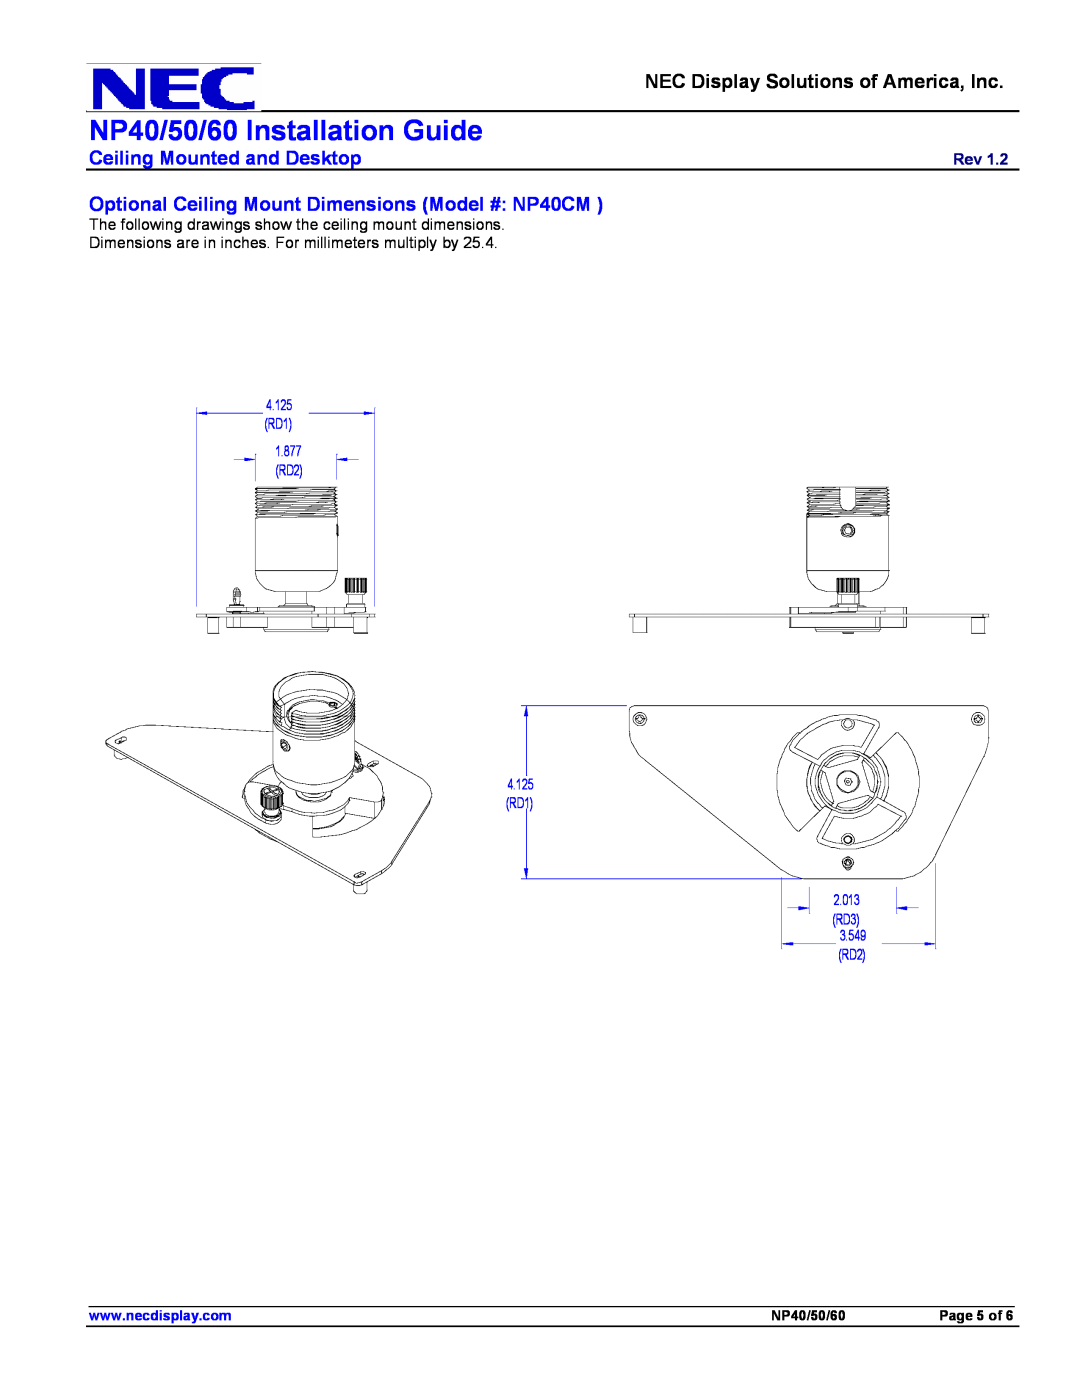 NEC Optional Ceiling Mount Dimensions Model # NP40CM, NP40/50/60 Installation Guide, Ceiling Mounted and Desktop 